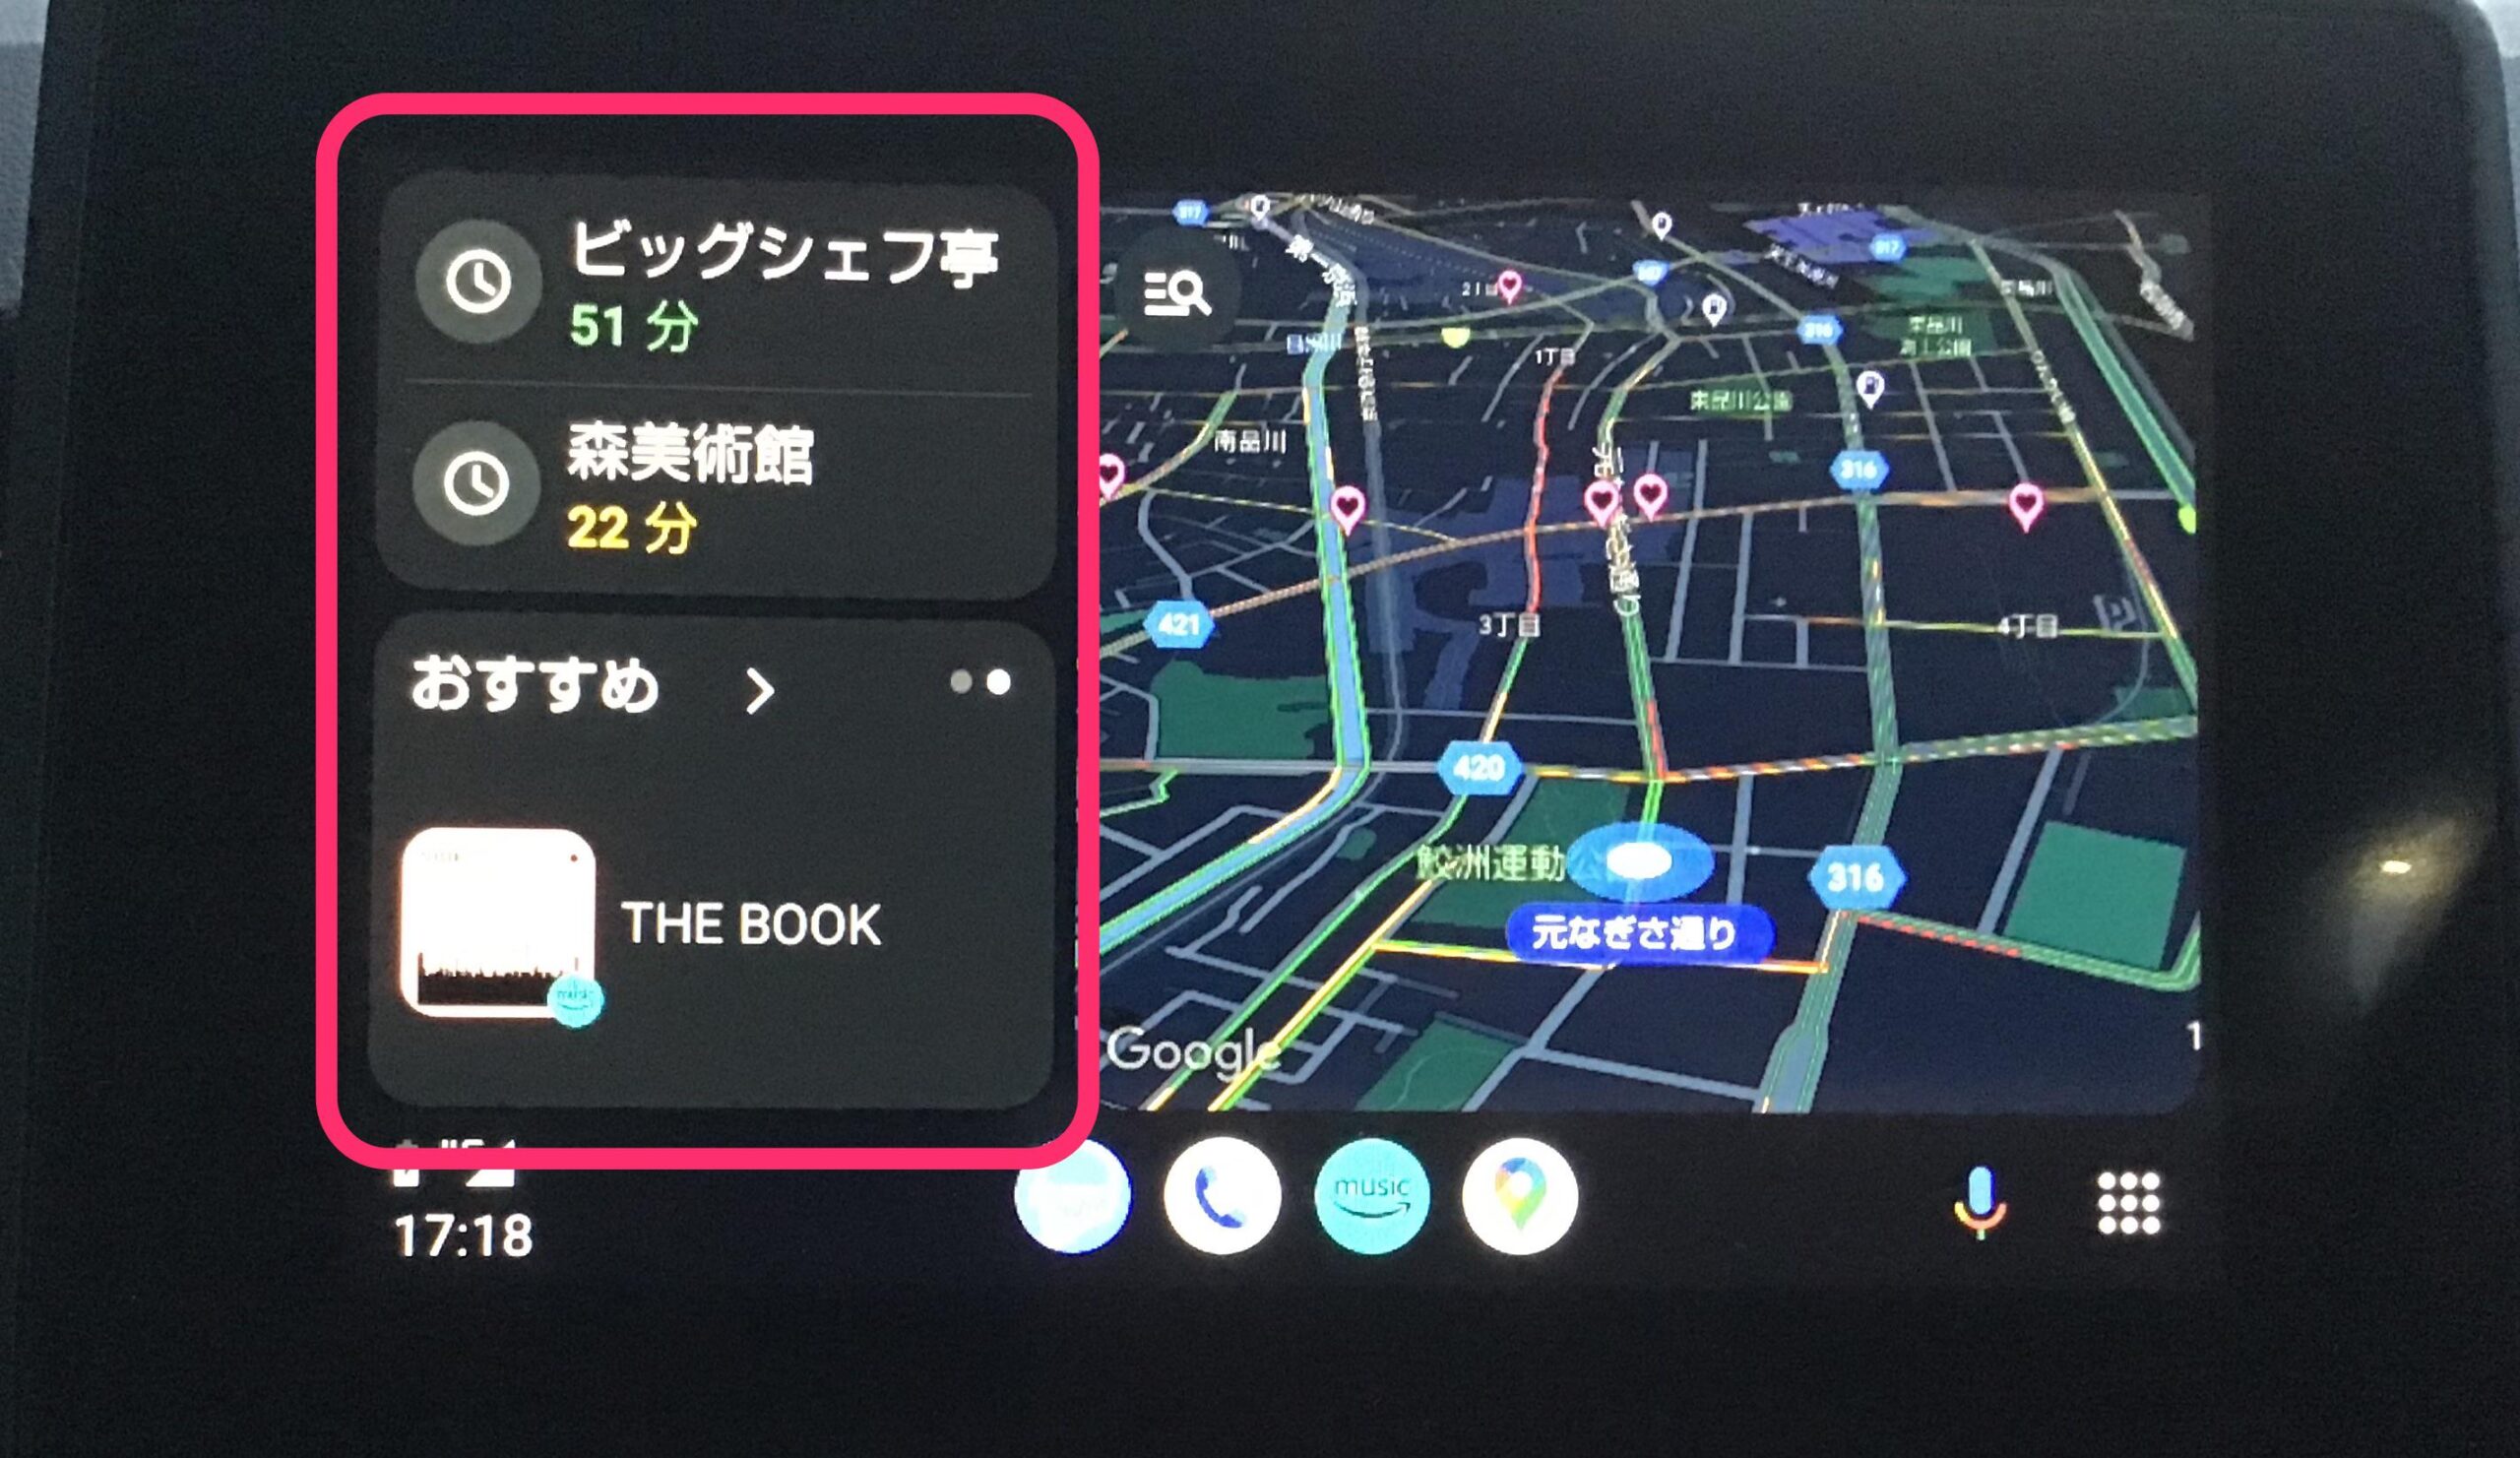 Android Auto　インターフェース 2画面配置